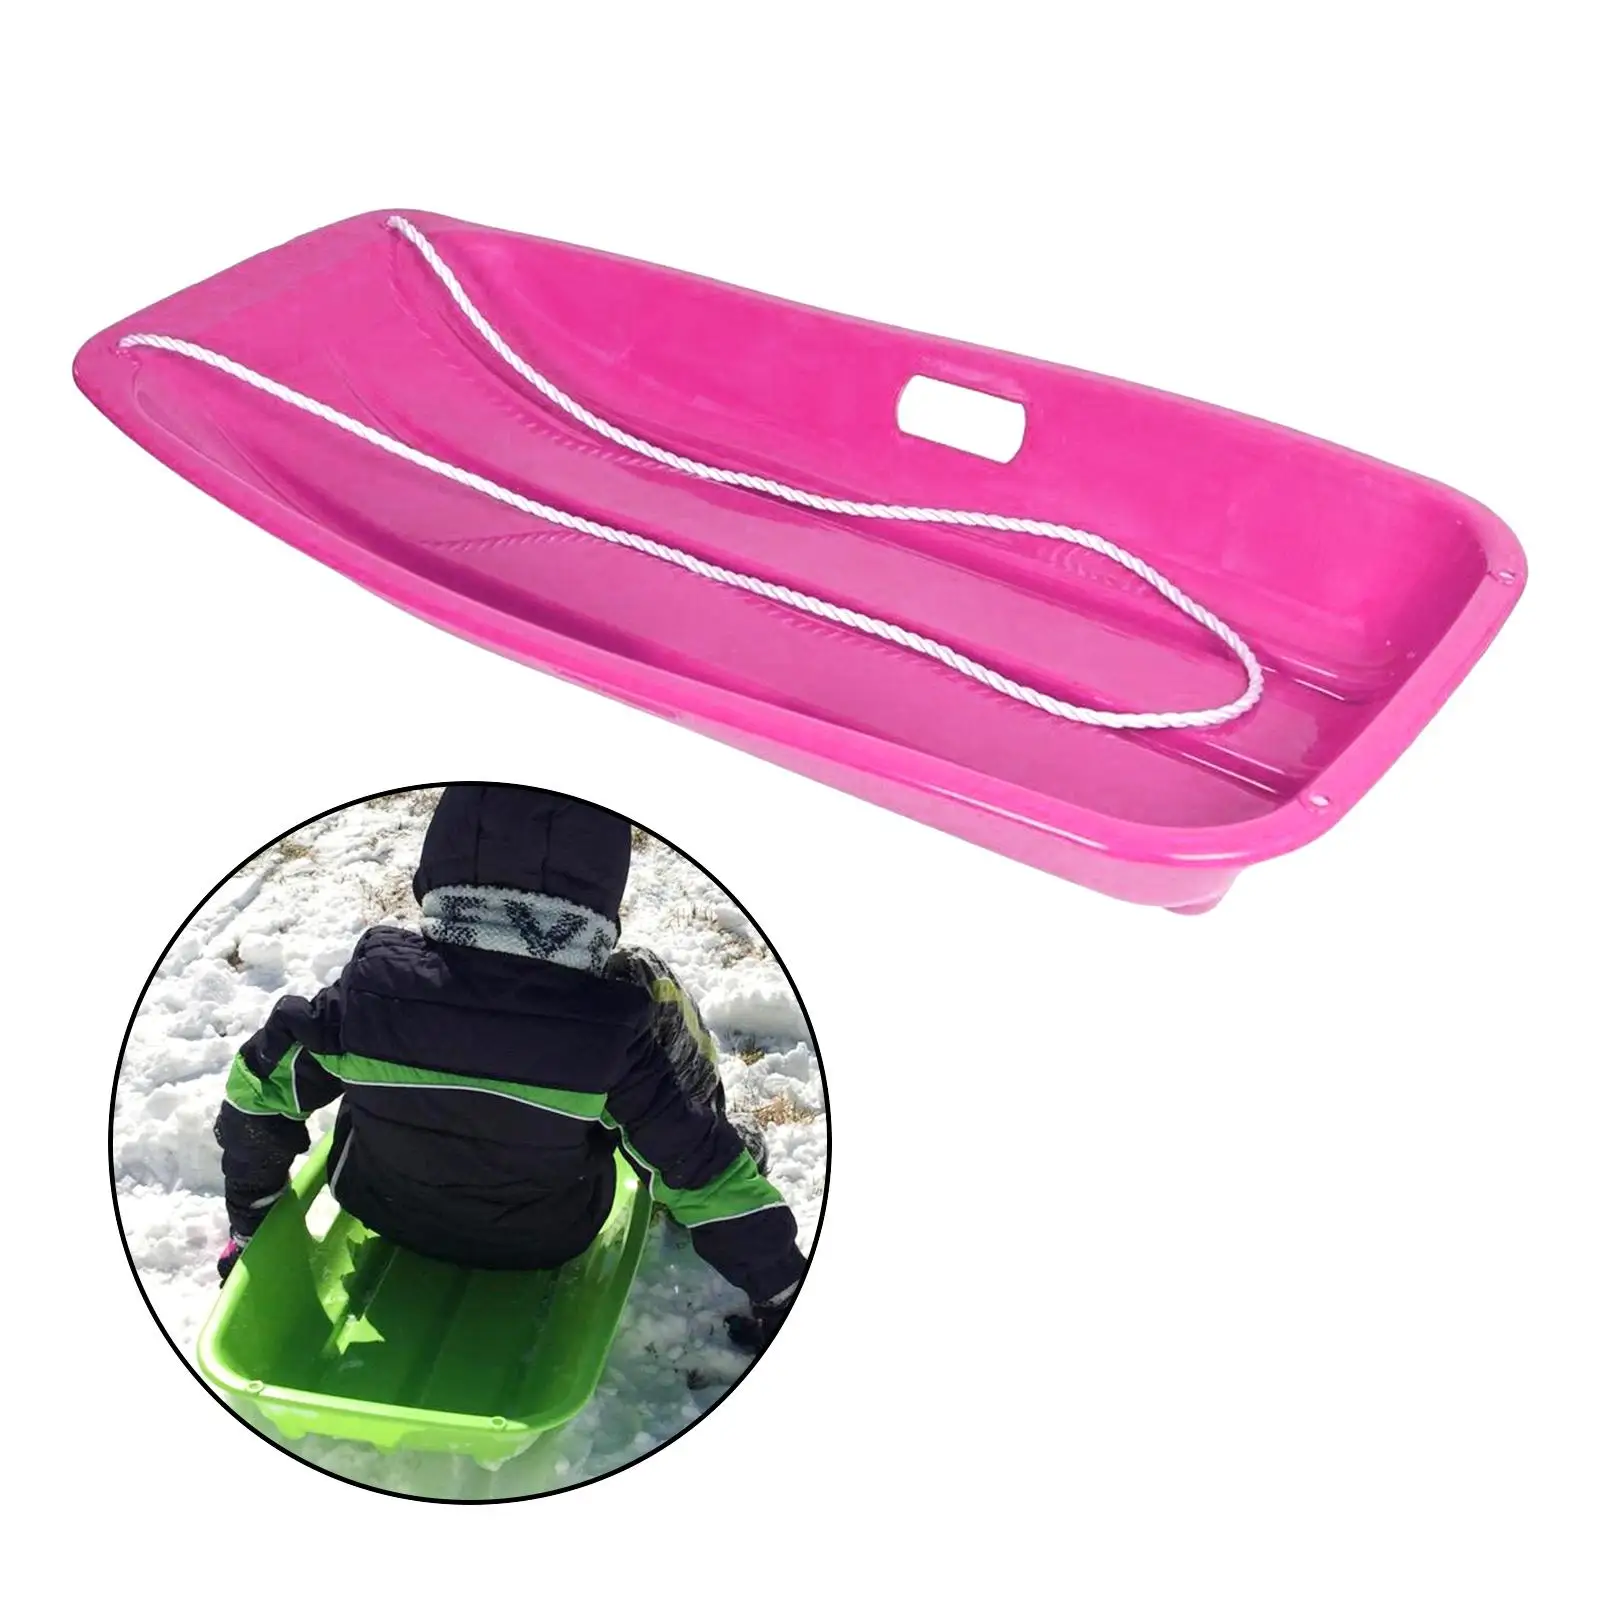 Outdoor Snow Sled Thicken Sledge Durable for Skating Kids